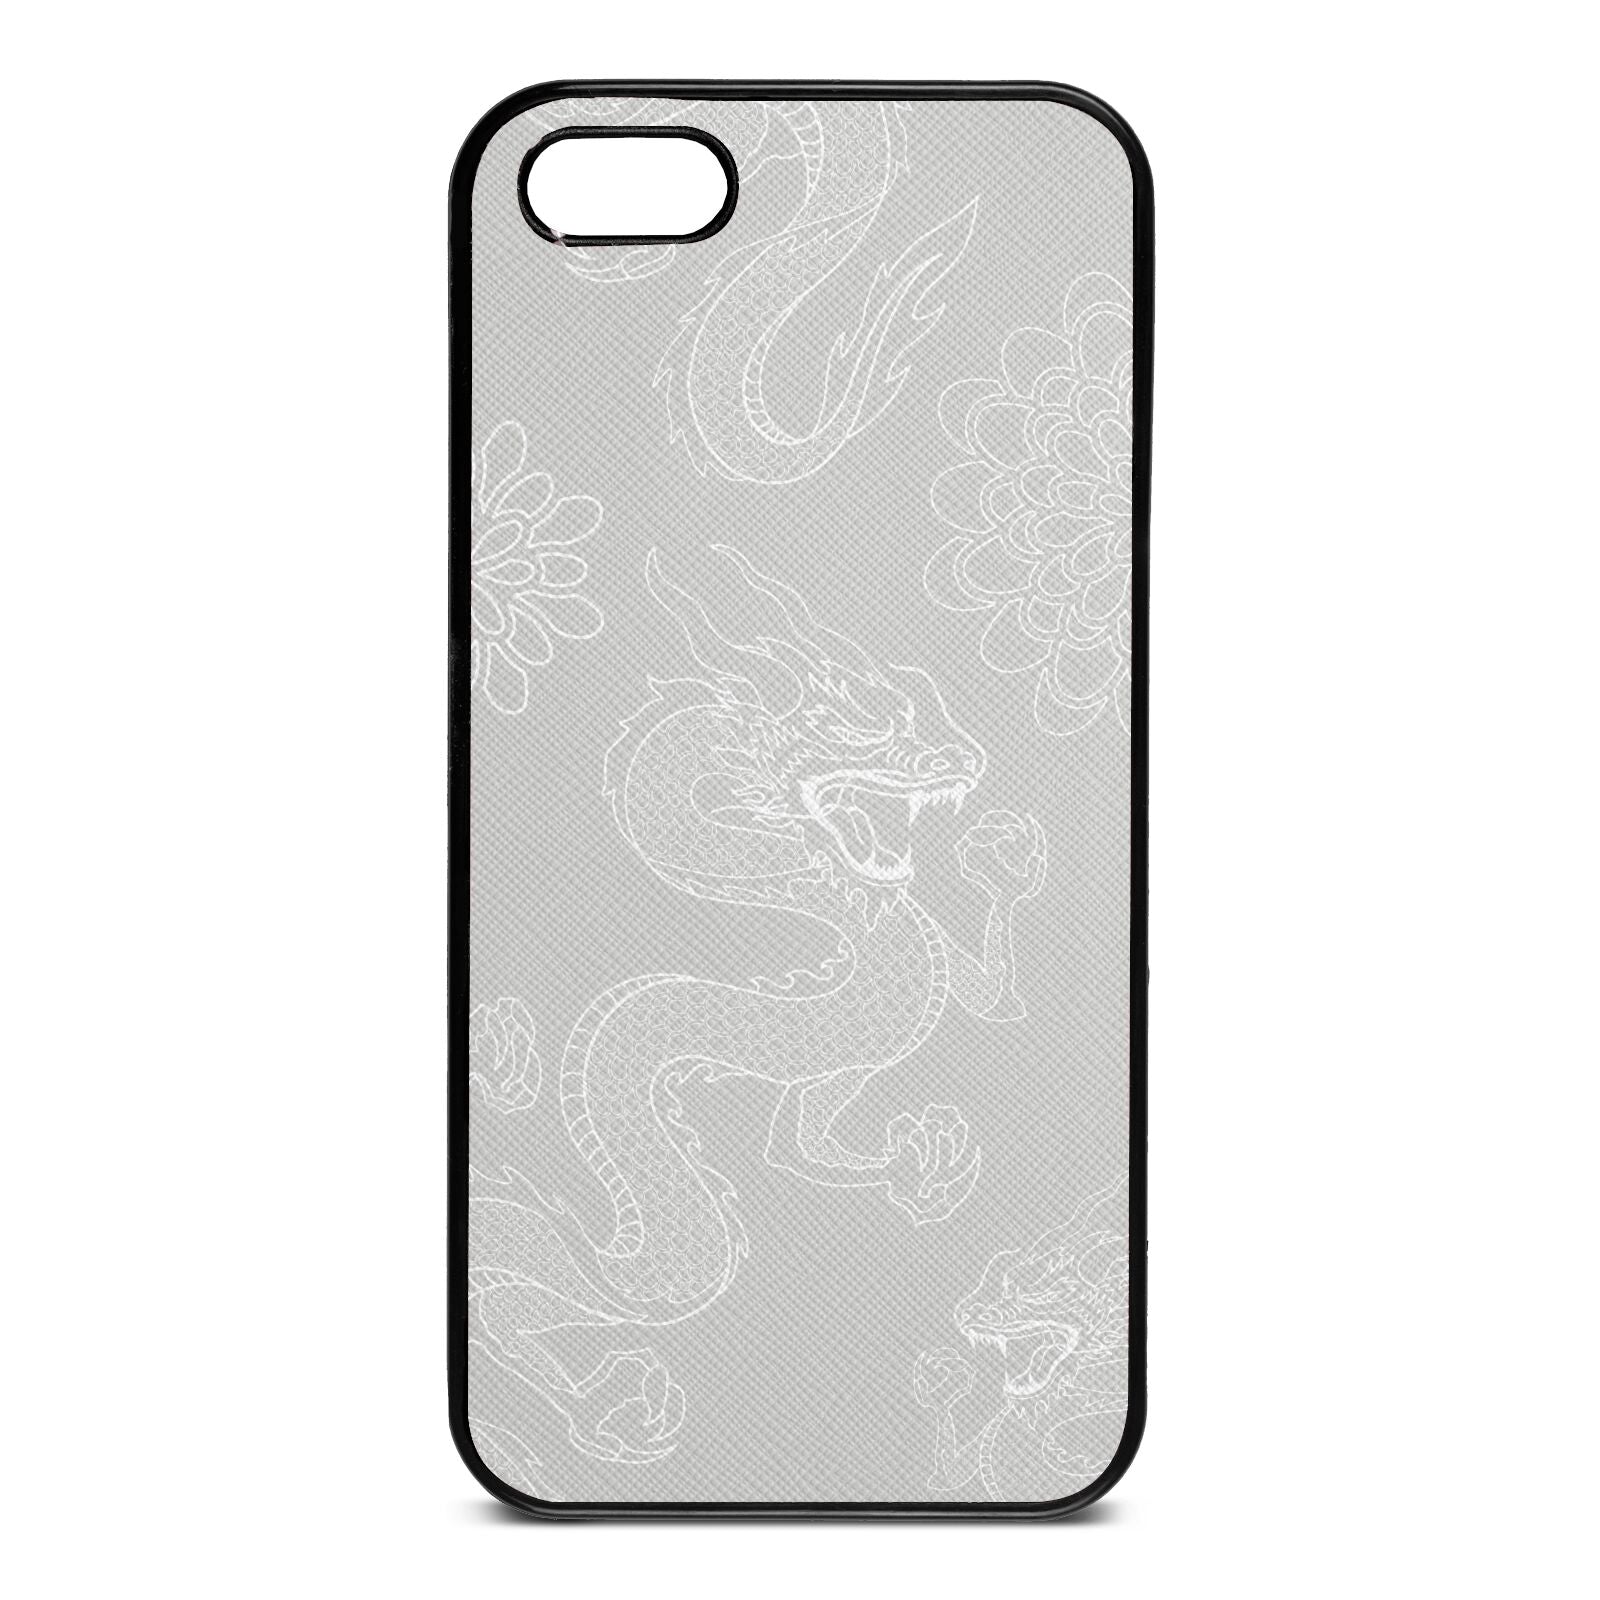 Dragons Silver Saffiano Leather iPhone 5 Case